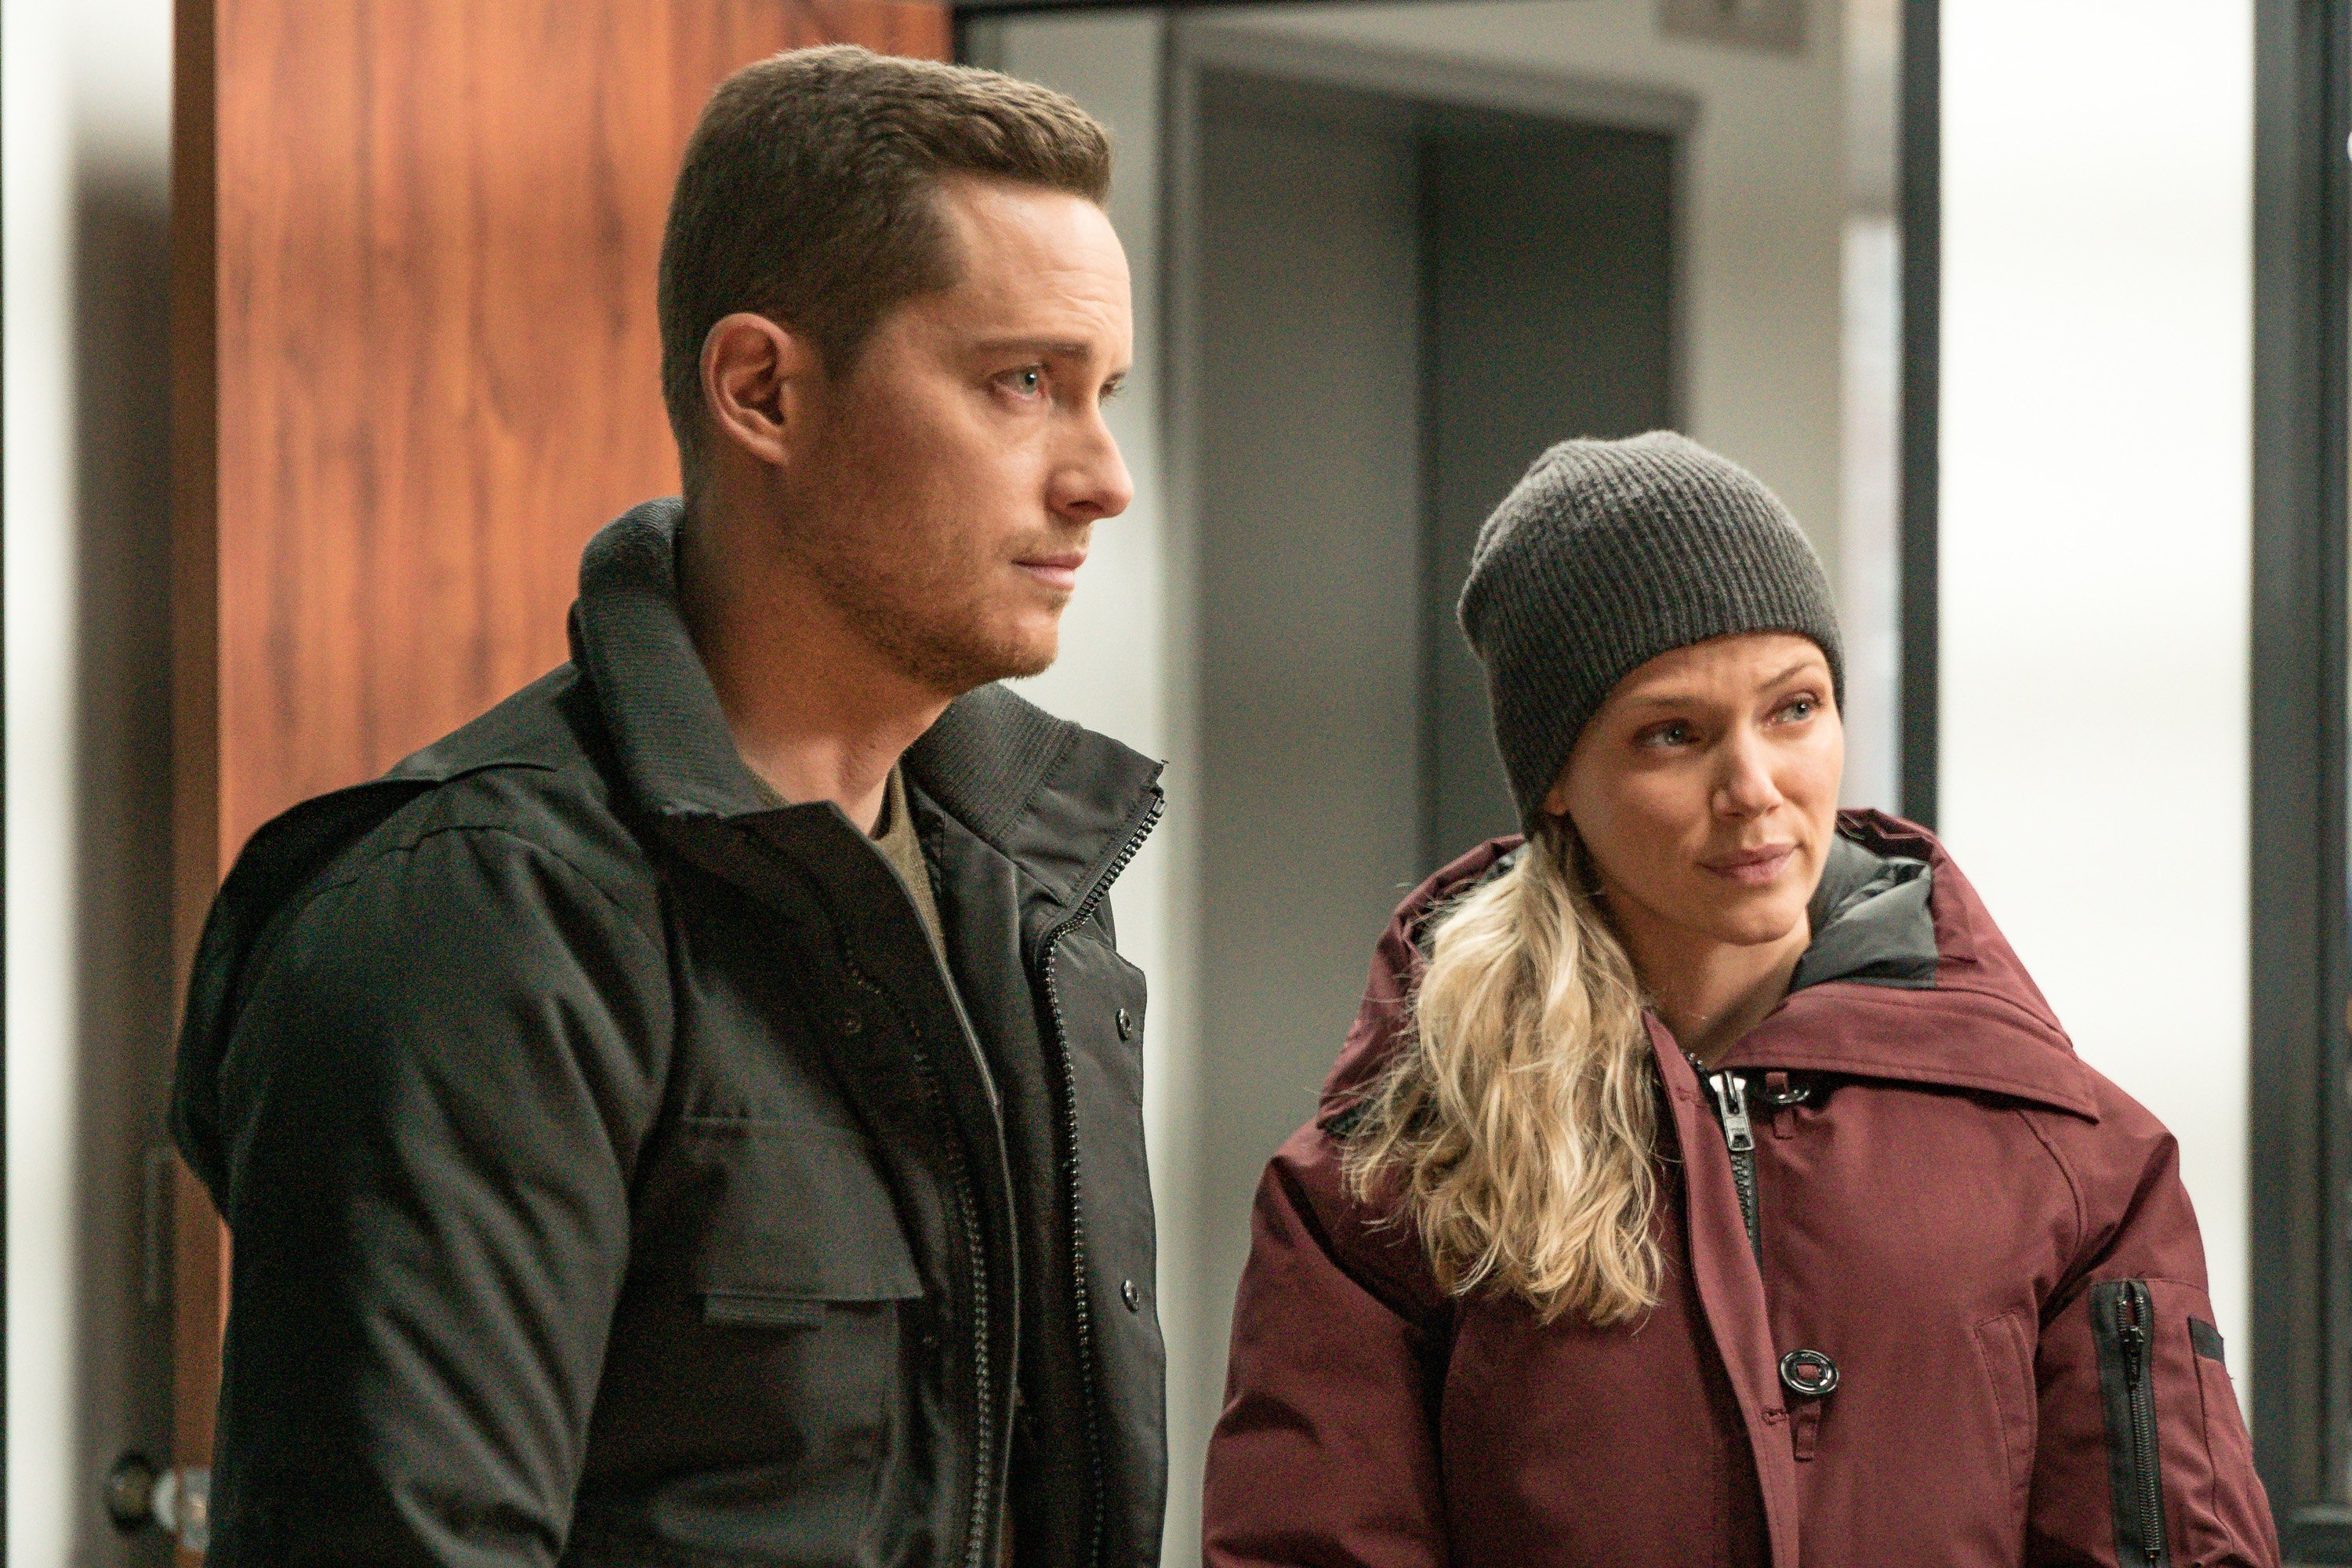 Jesse Lee Soffer as Jay Halstead and Tracy Spiridakos as Hailey Upton are pictured during Ep. 806, "Equal Justice," of Season 8 of "Chicago P.D." | Source: Getty Images